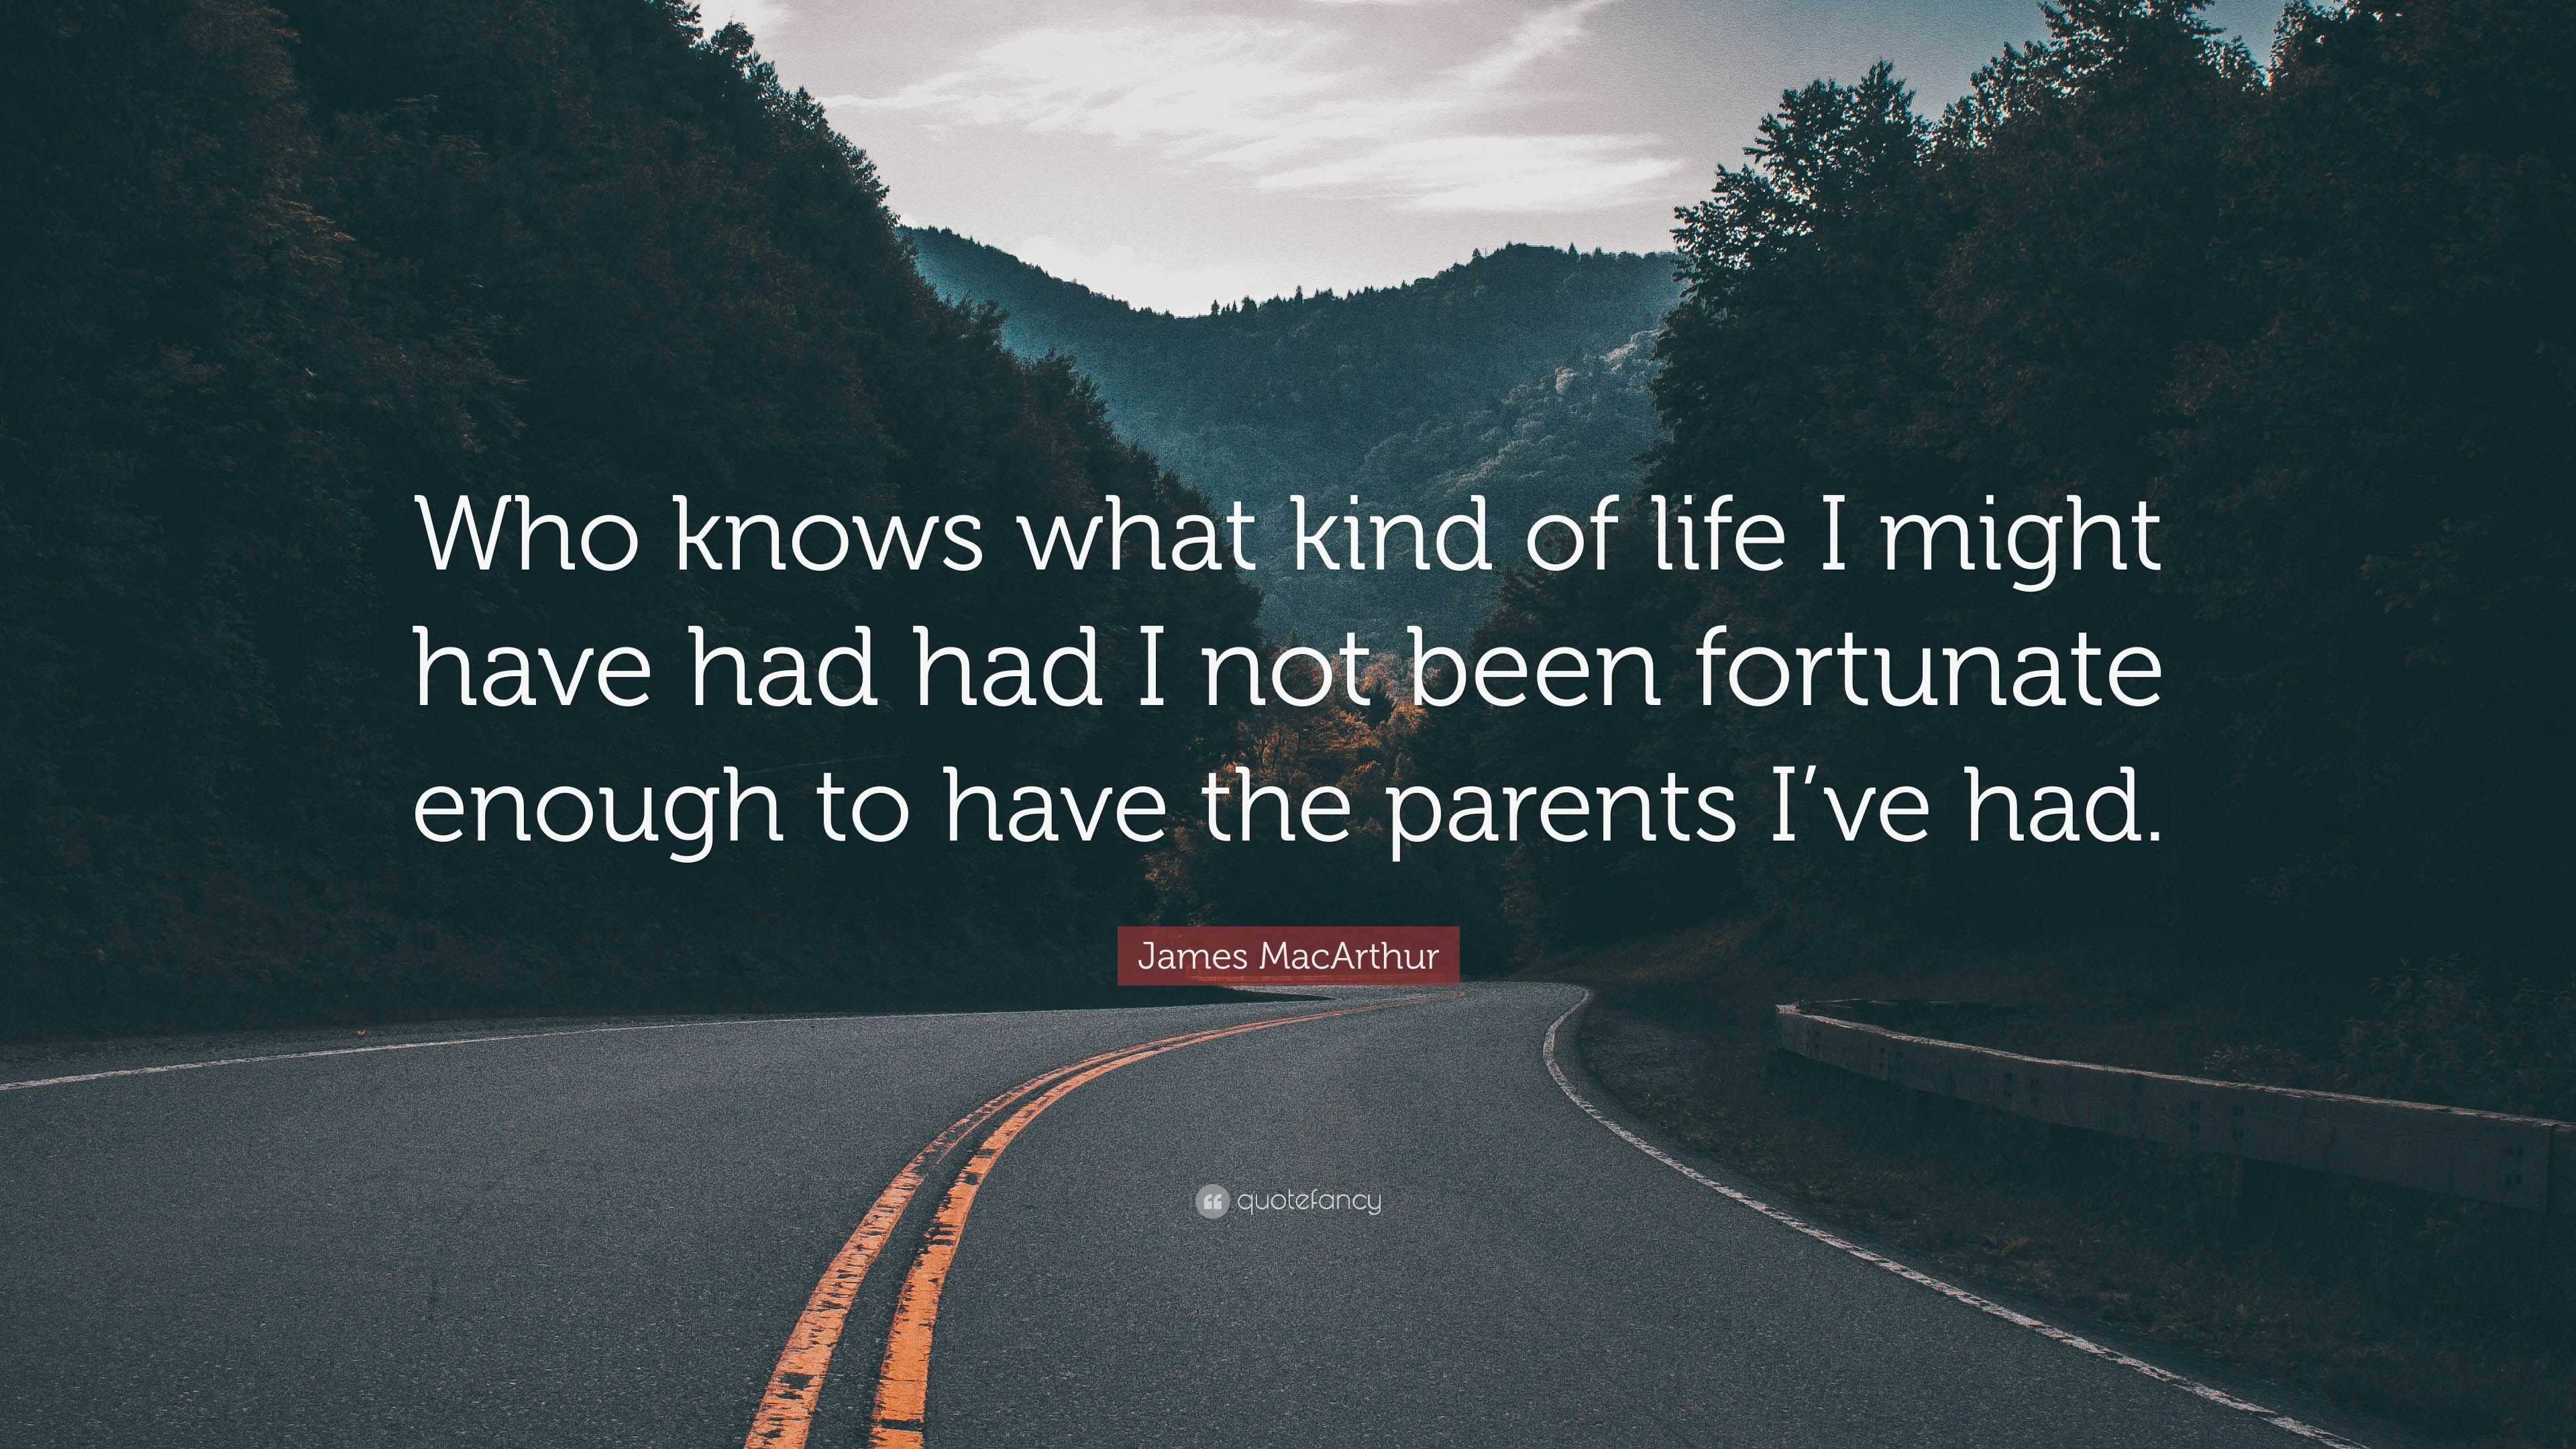 James MacArthur Quote: “Who knows what kind of life I might have had ...